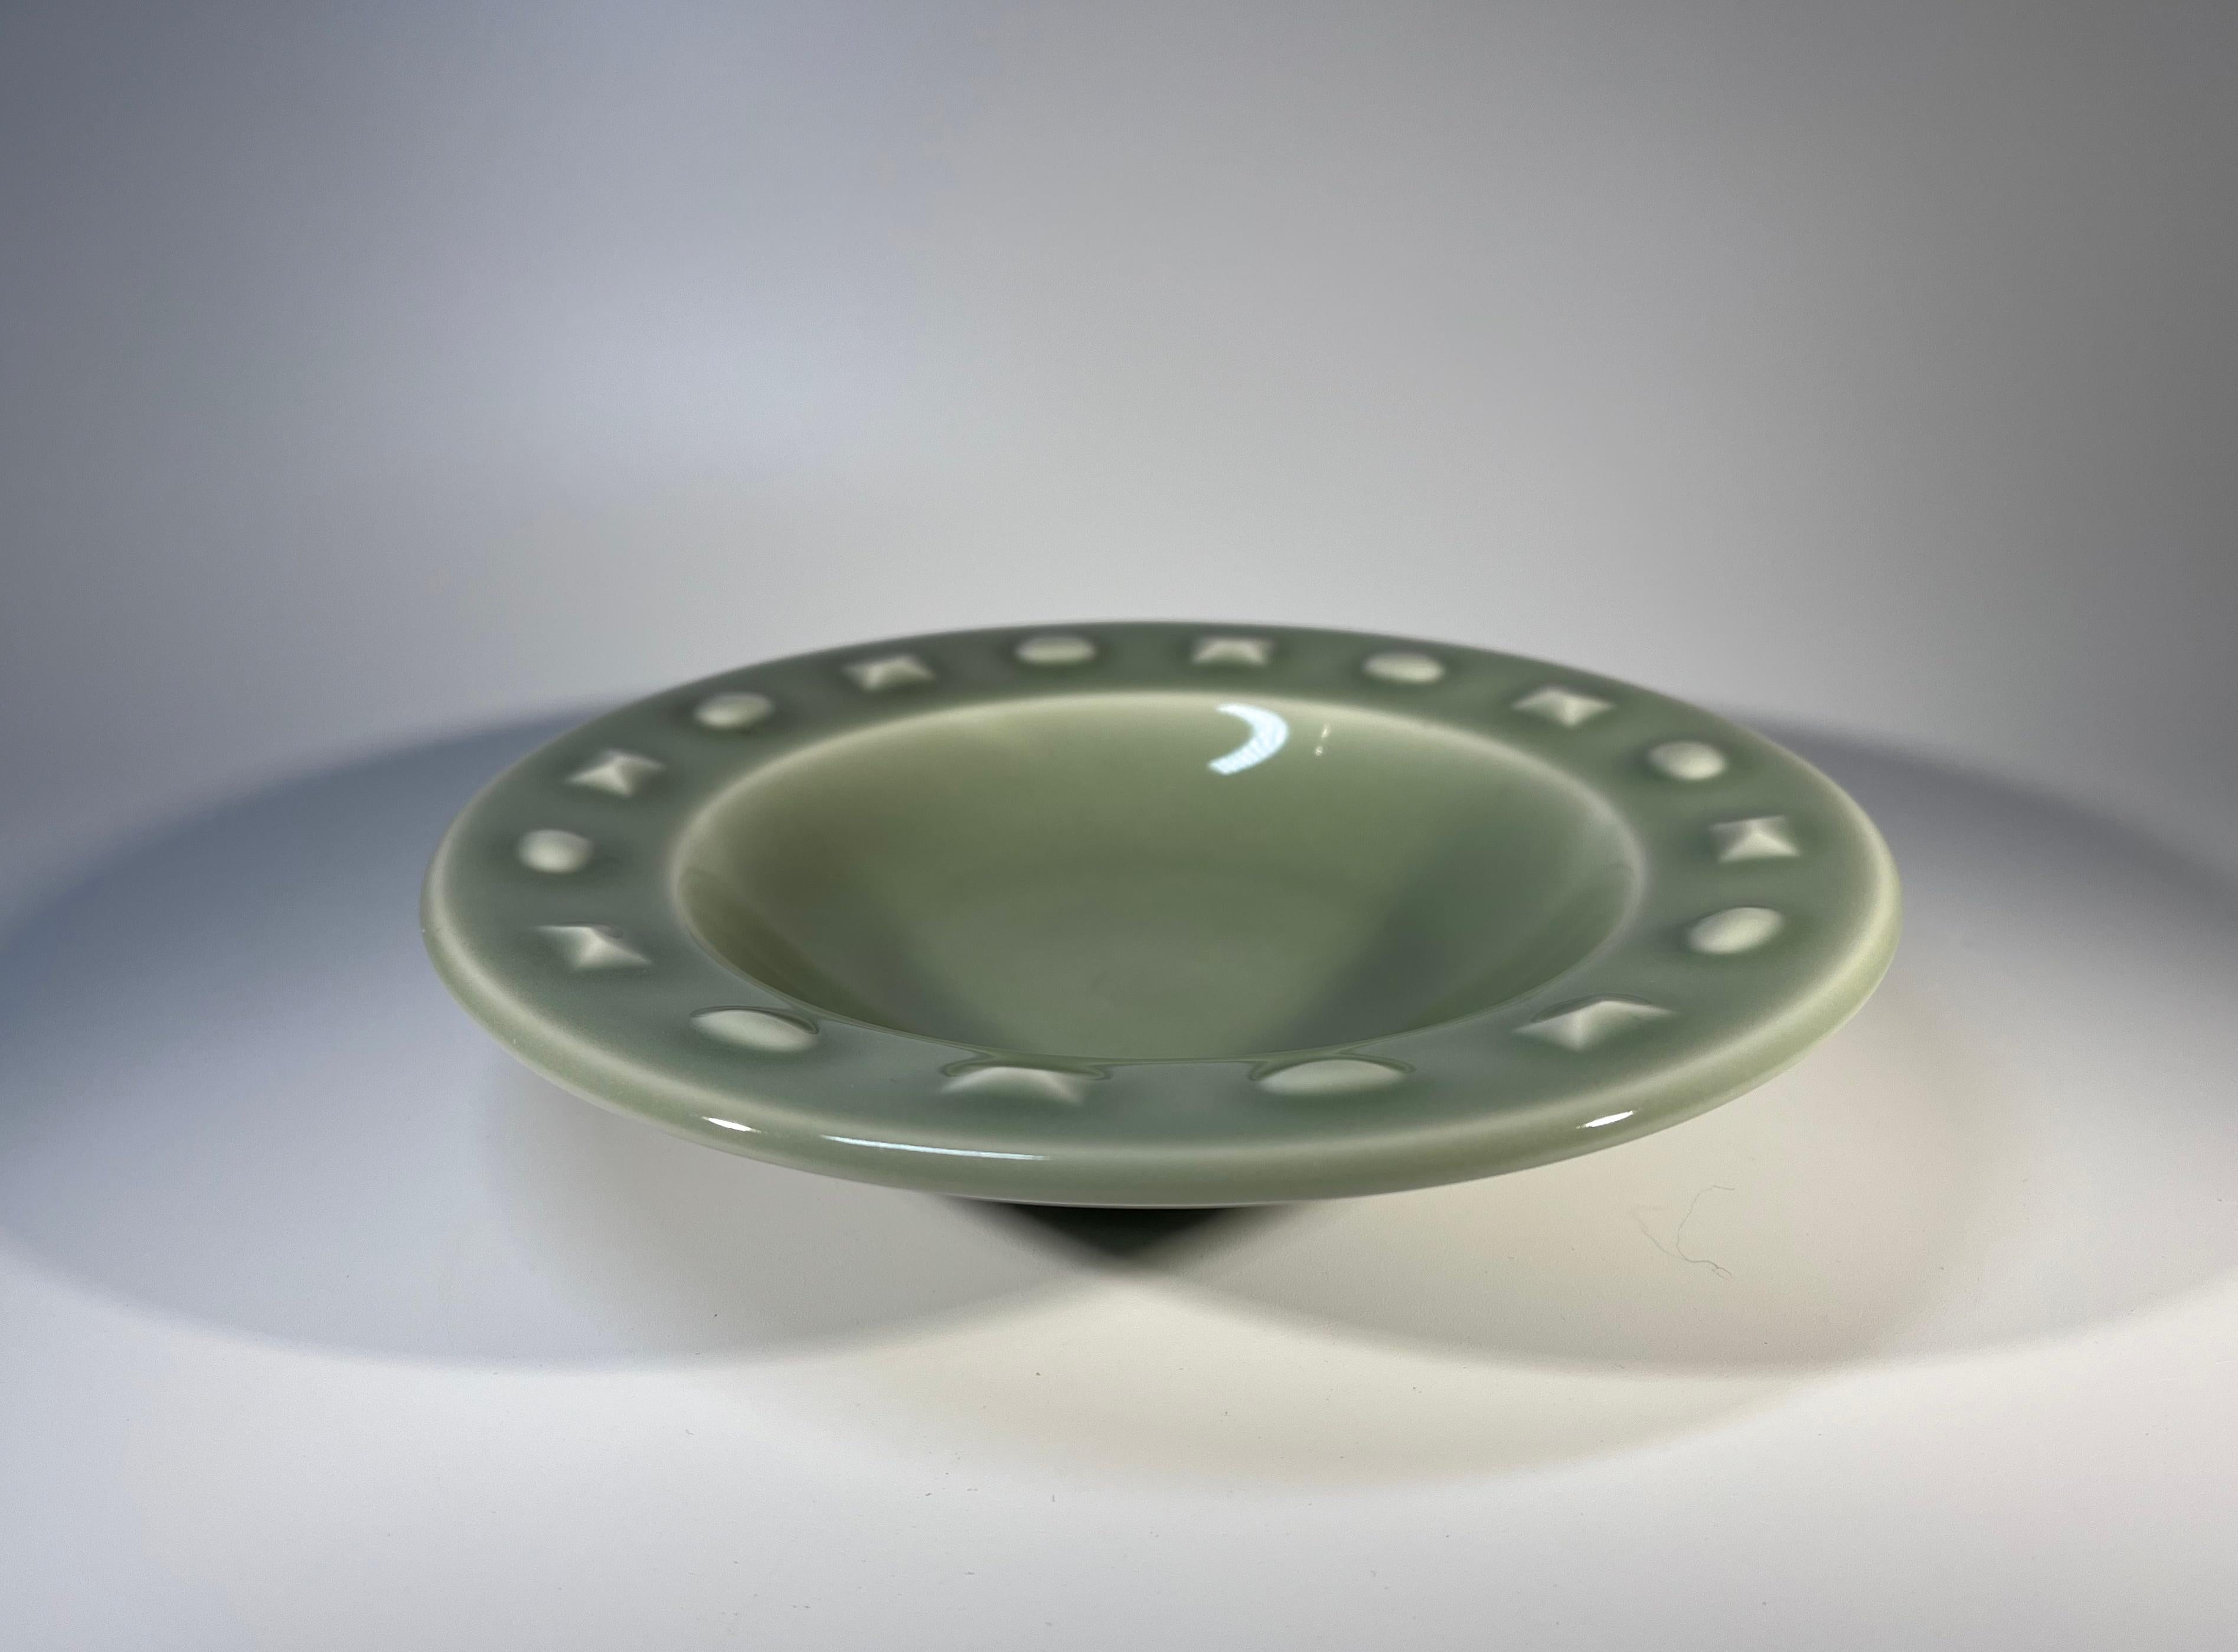 A beautiful celadon glazed dish by Hans Henrik Hansen for Royal Copenhagen 
Exemplary transparent glaze and form
Circa 1954
Stamped and numbered HHH 4397
Height 1.5 inch, Diameter 7.25 inch
In excellent condition
Wear consistent with age and use